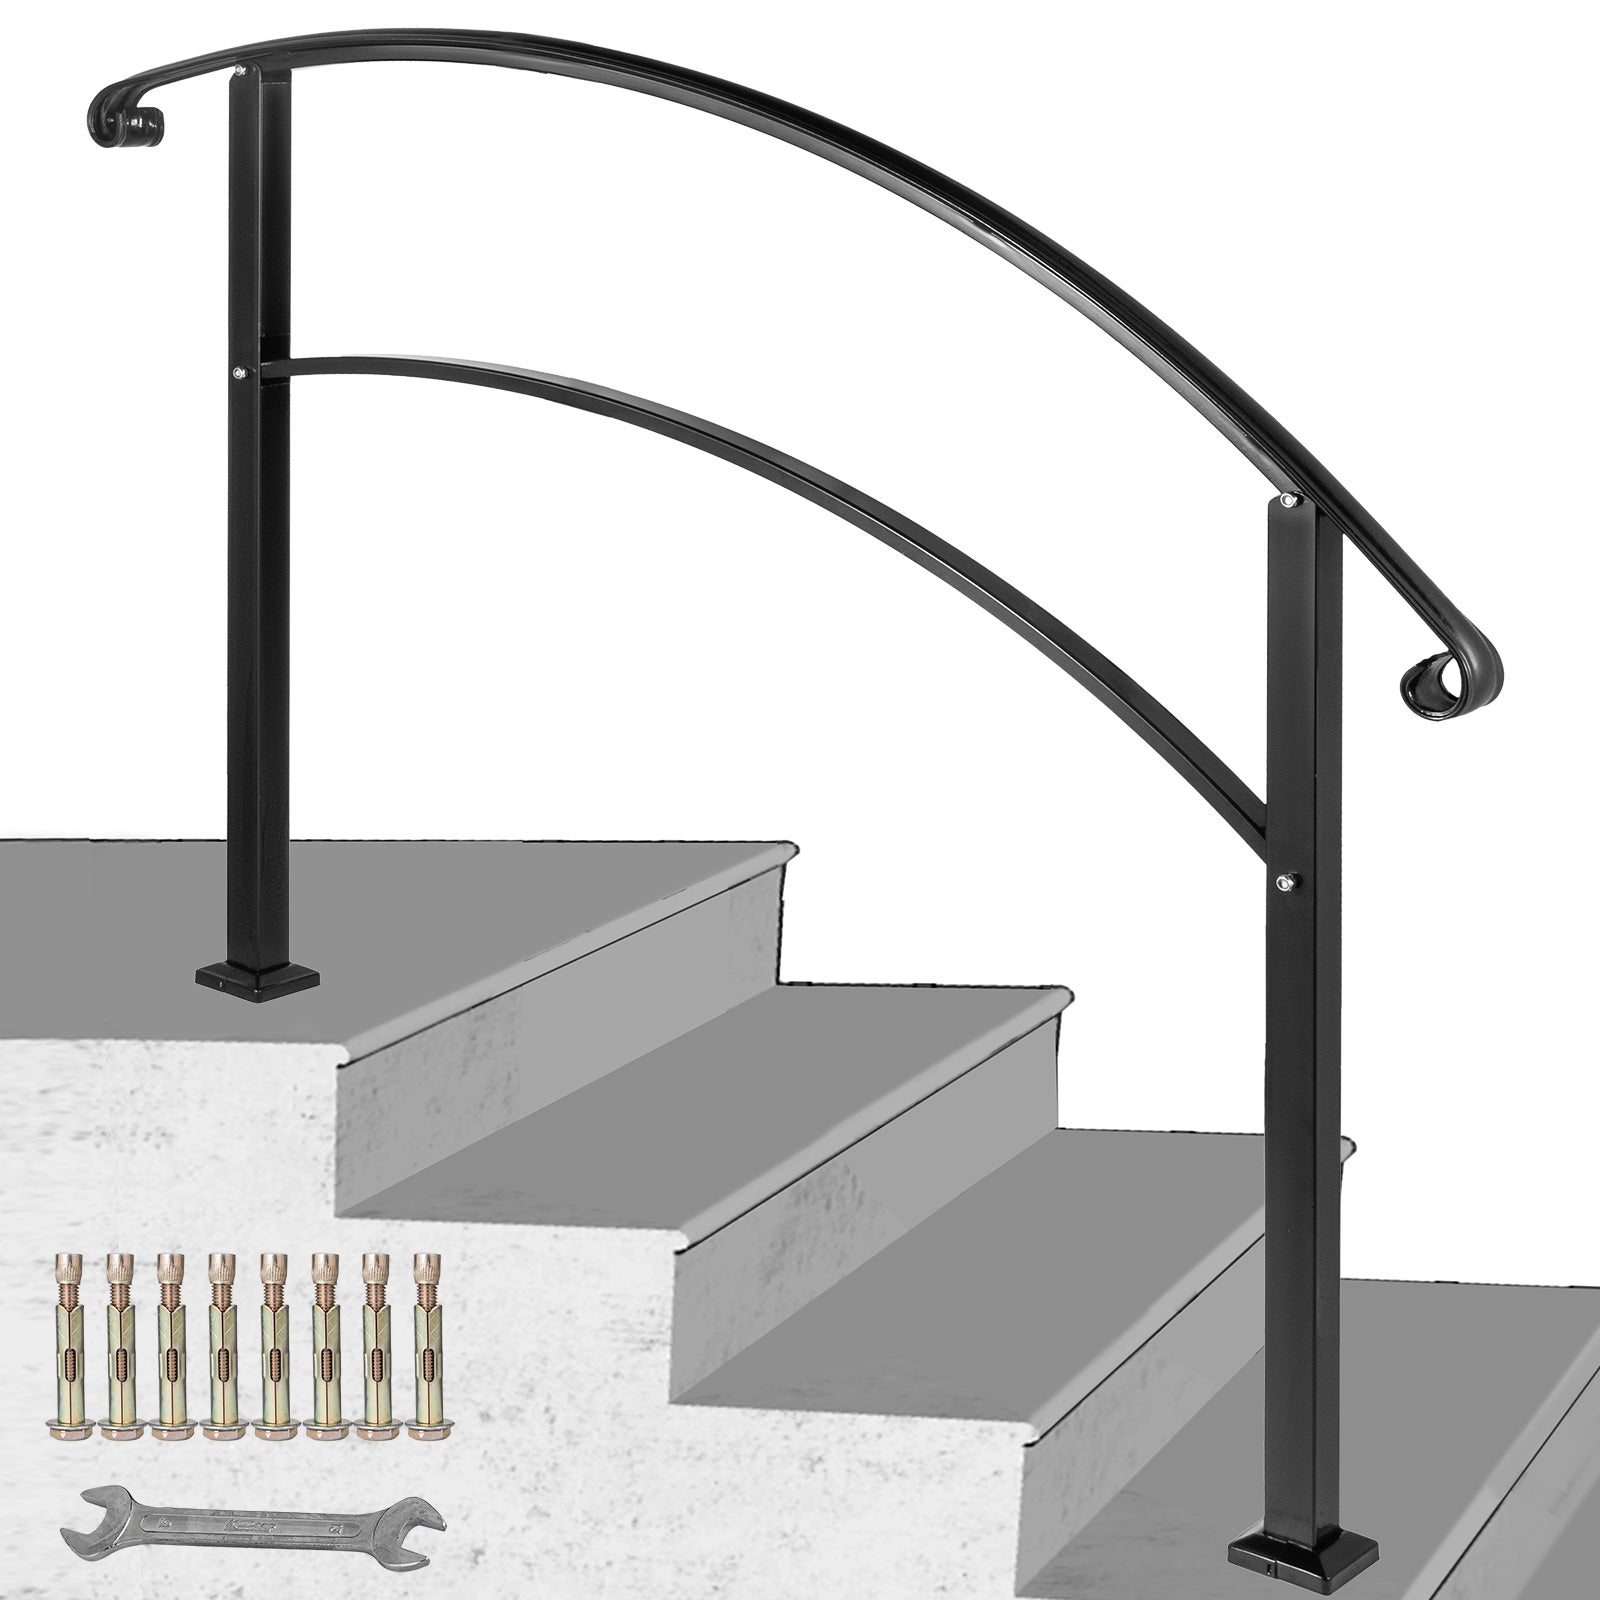 4ft Handrail Angle Adjustable Fits 3 Or 4 Steps Office Paver Step Iron ...